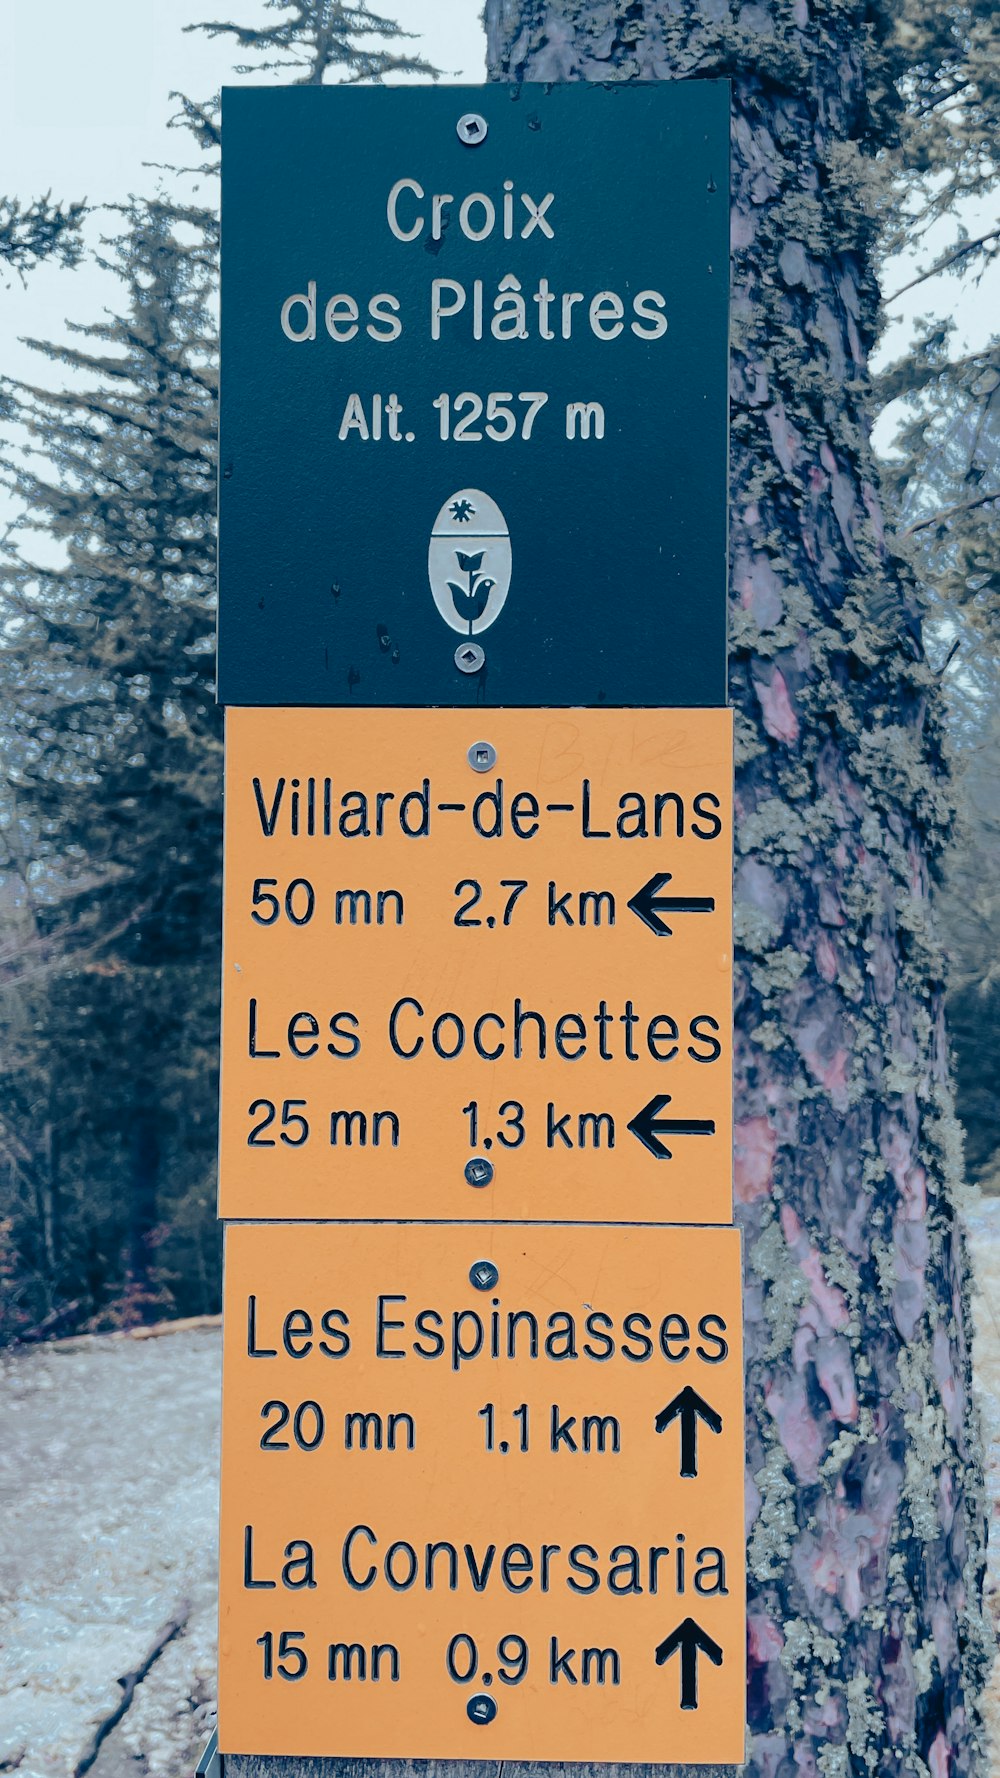 a sign is posted on a tree in the snow